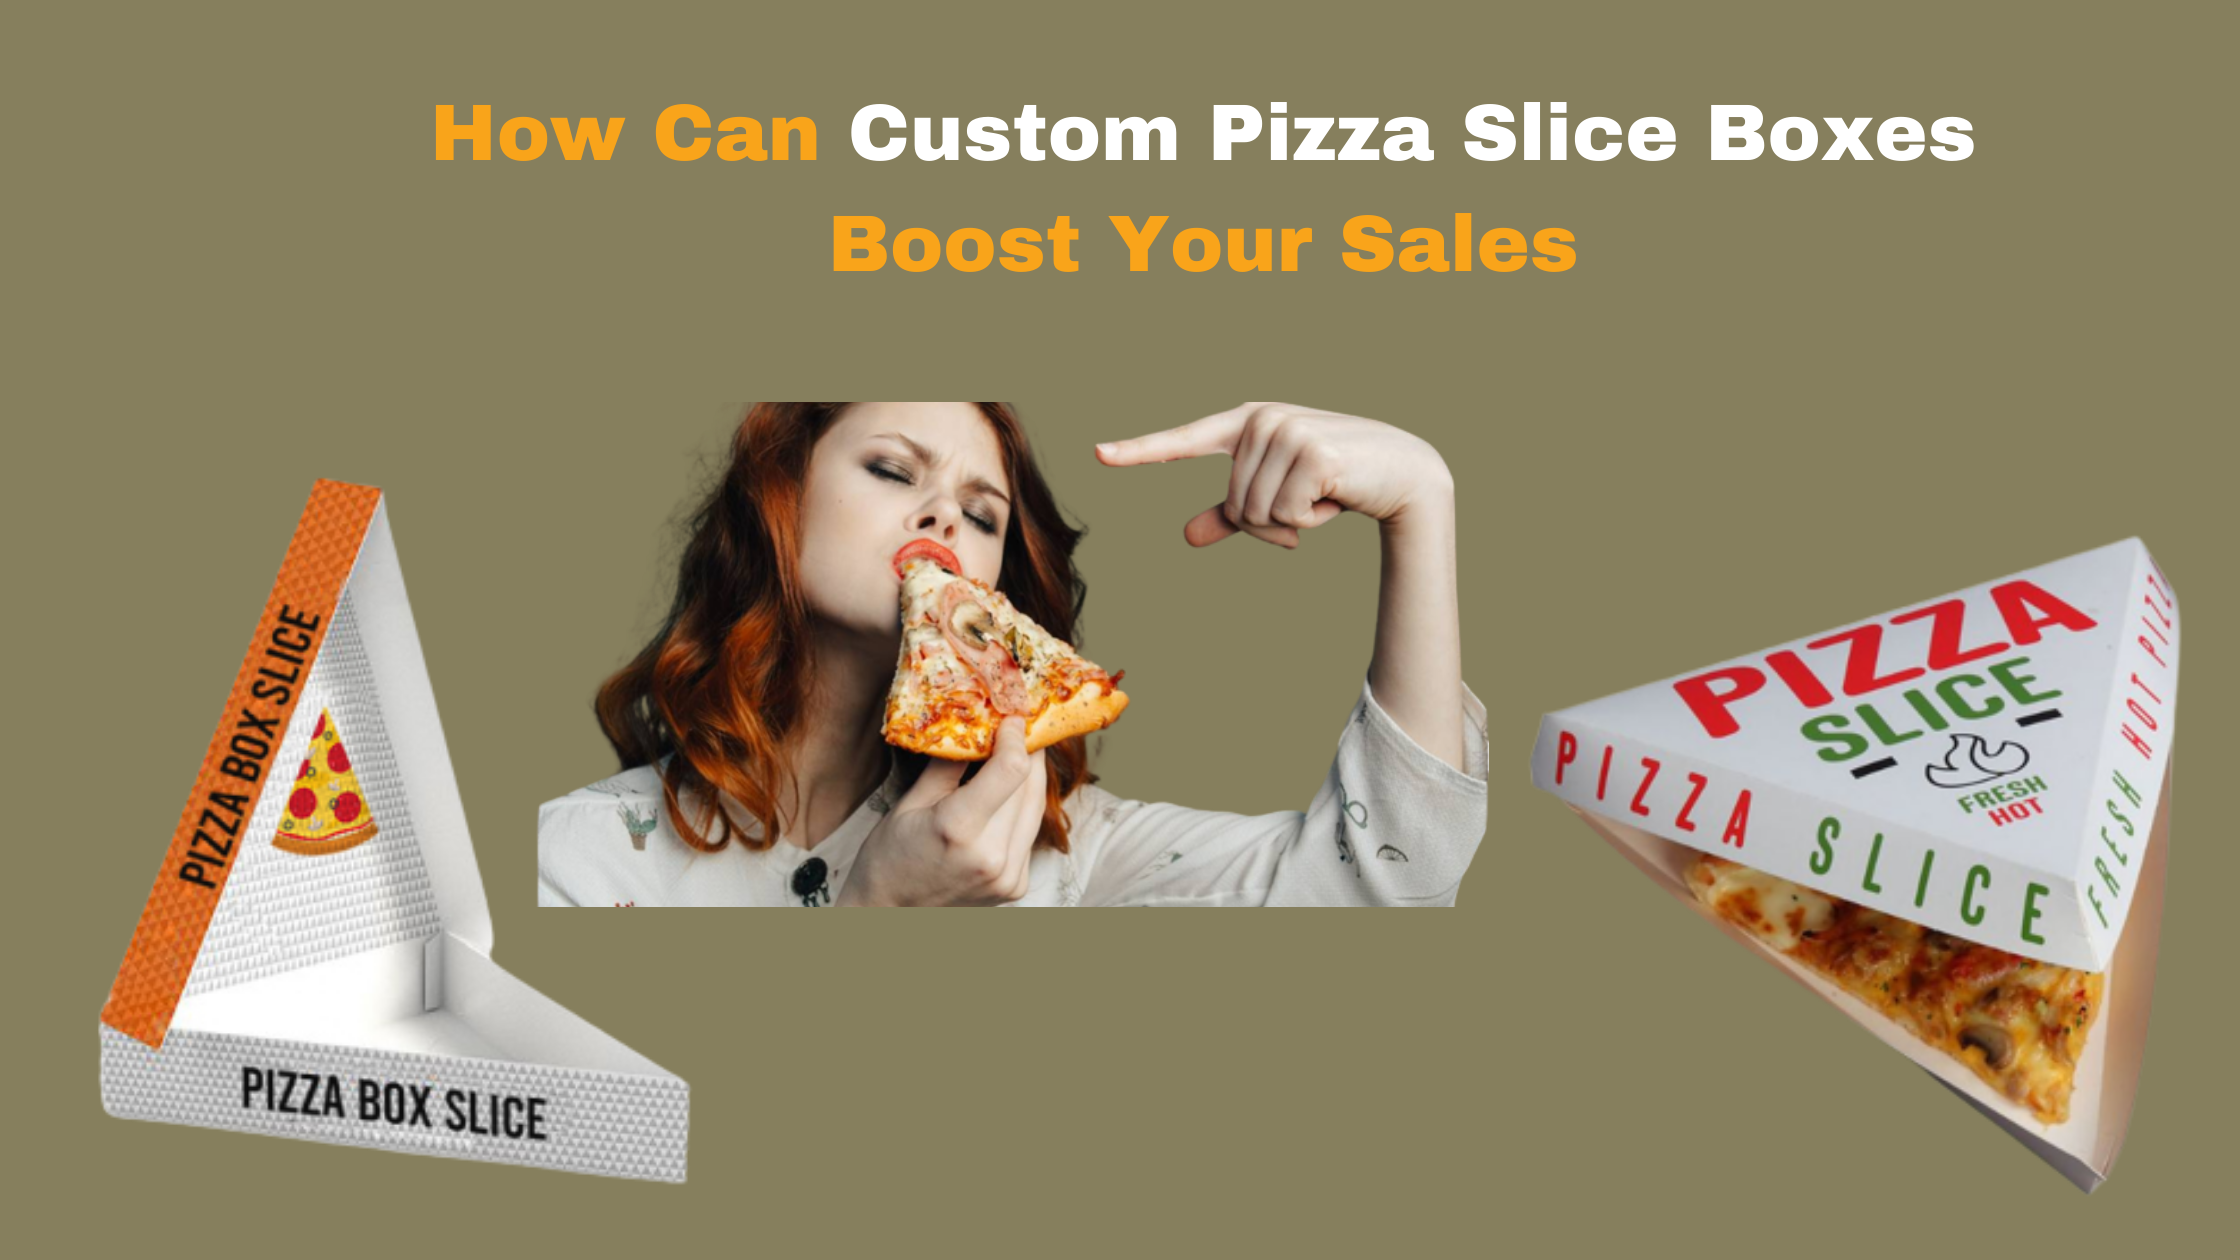 How Can Custom Pizza Slice Boxes Boost Your Sales